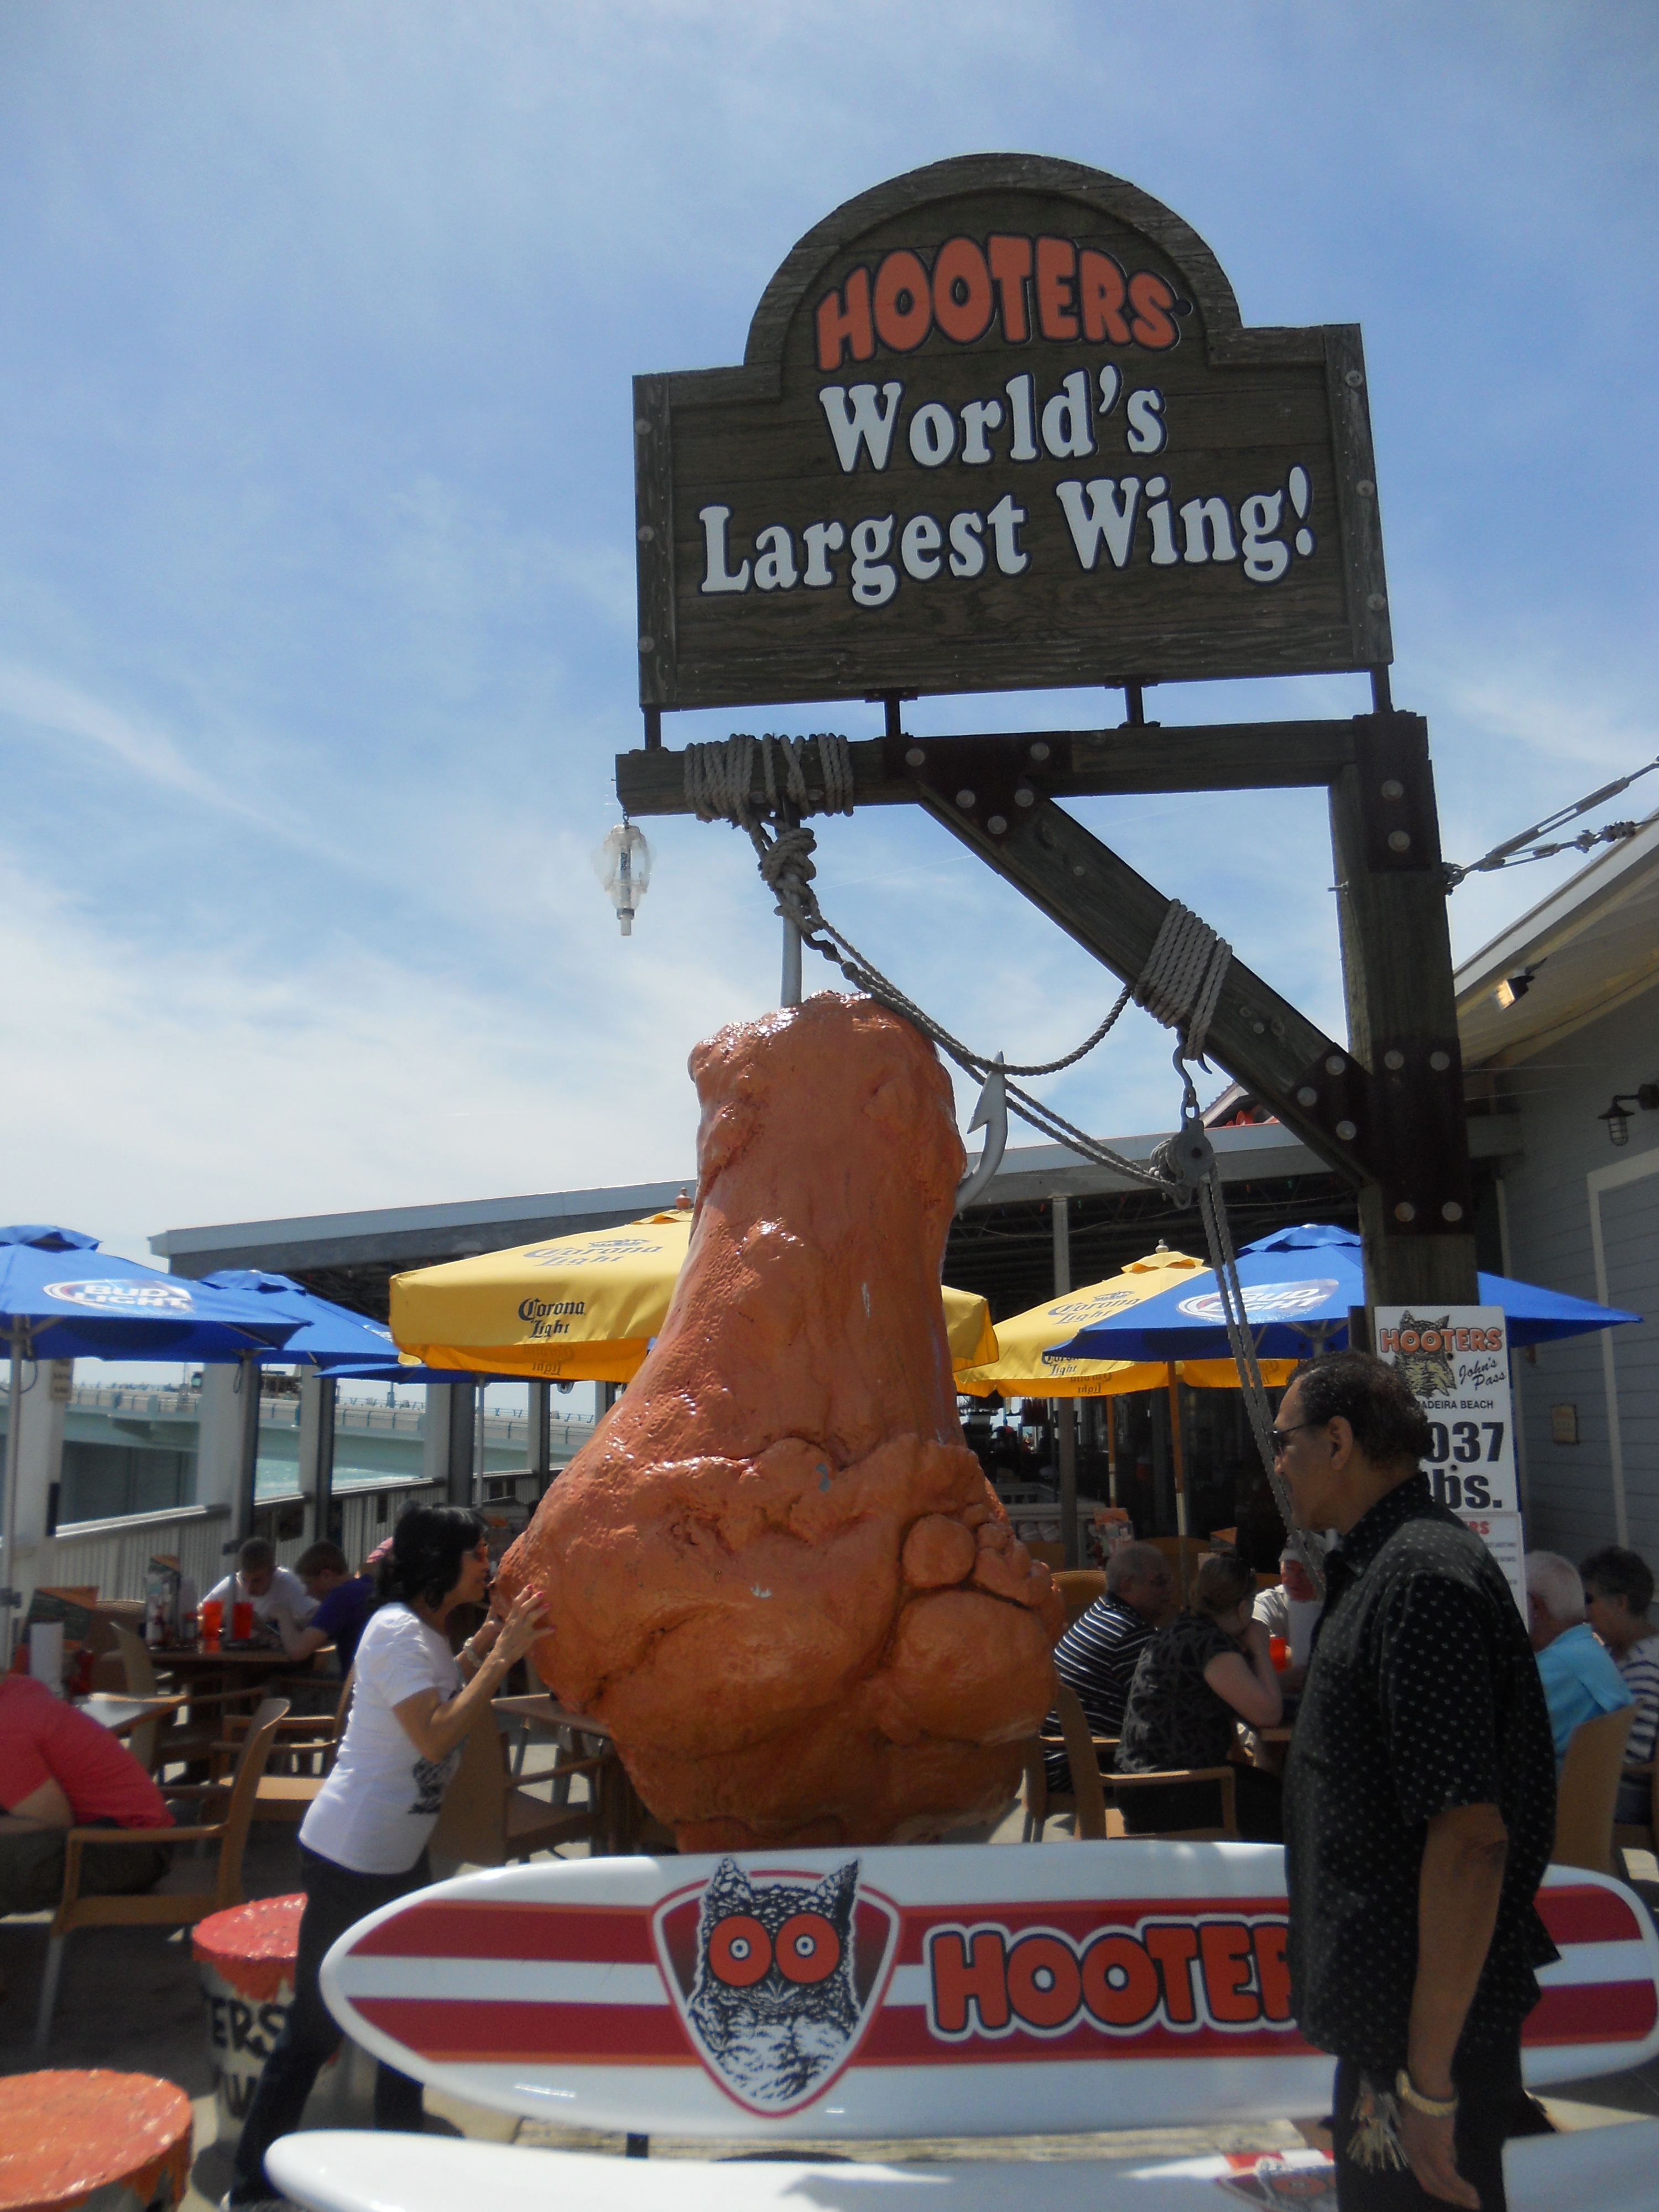 Come on novelty sign maker, you had only one job.    Girl posing with giant leg under sign that says "world's largest wing".